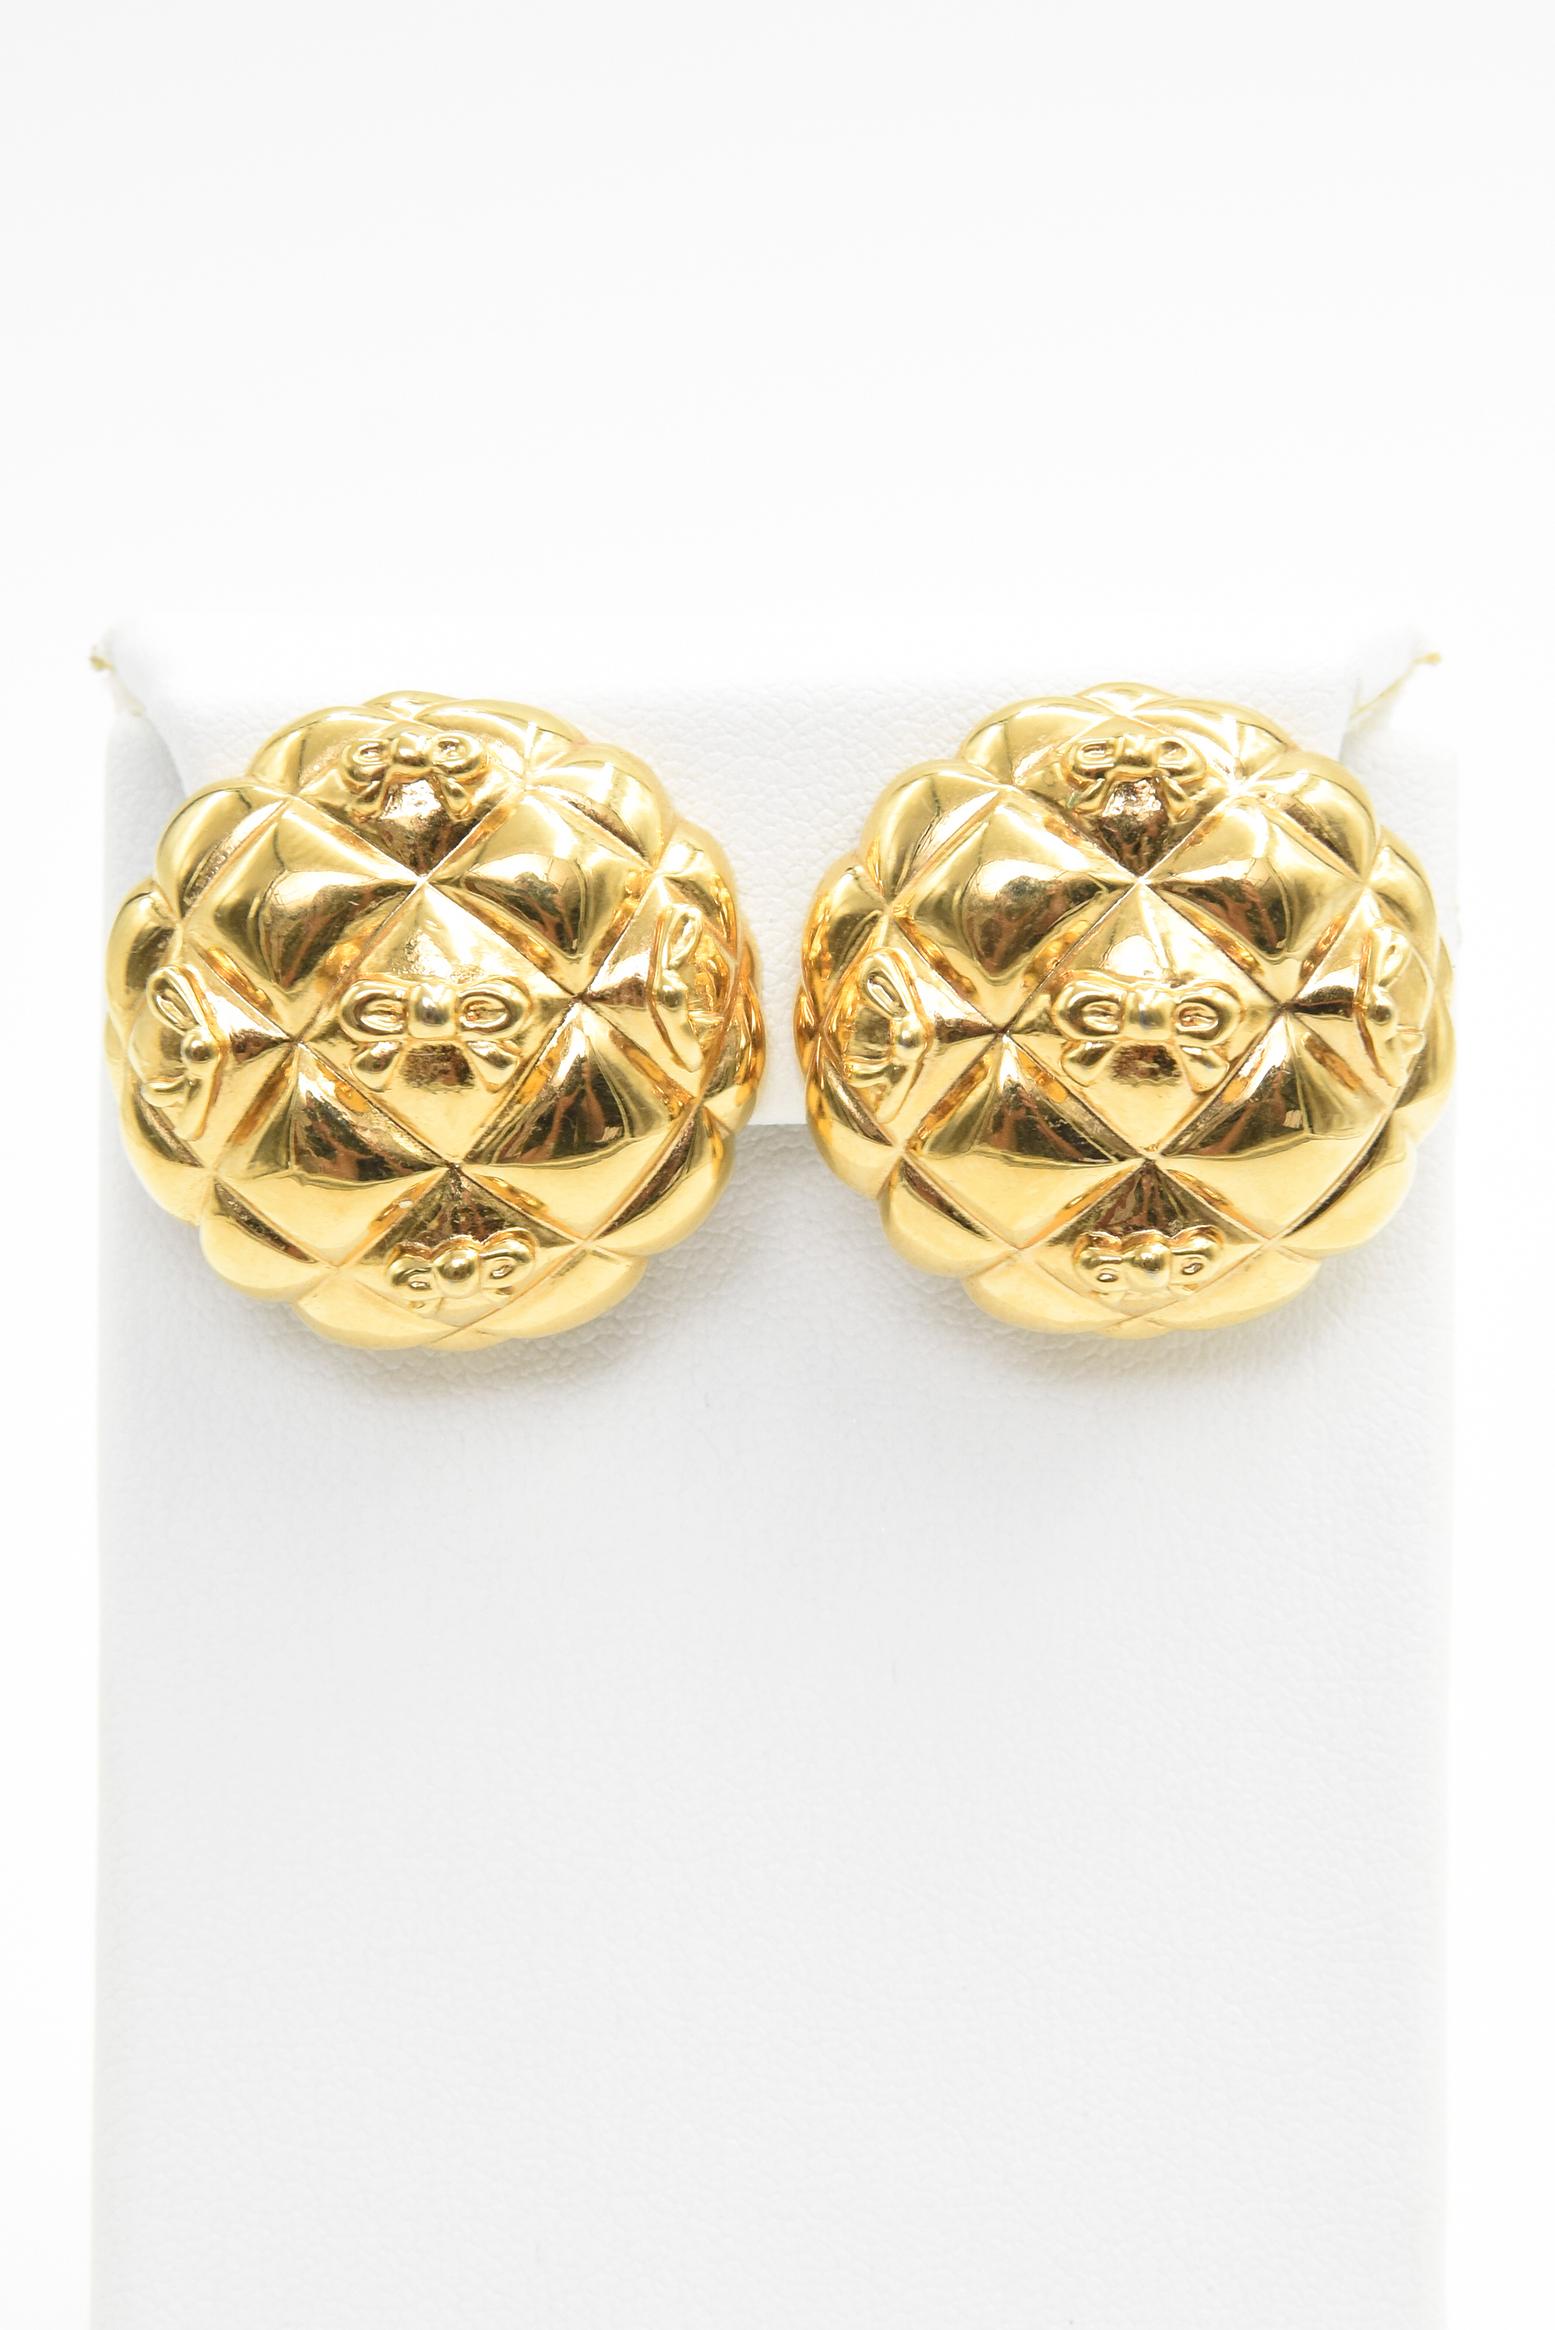 Chanel Style Quilted with Bows Gold Tone Button Clip On Earrings 4